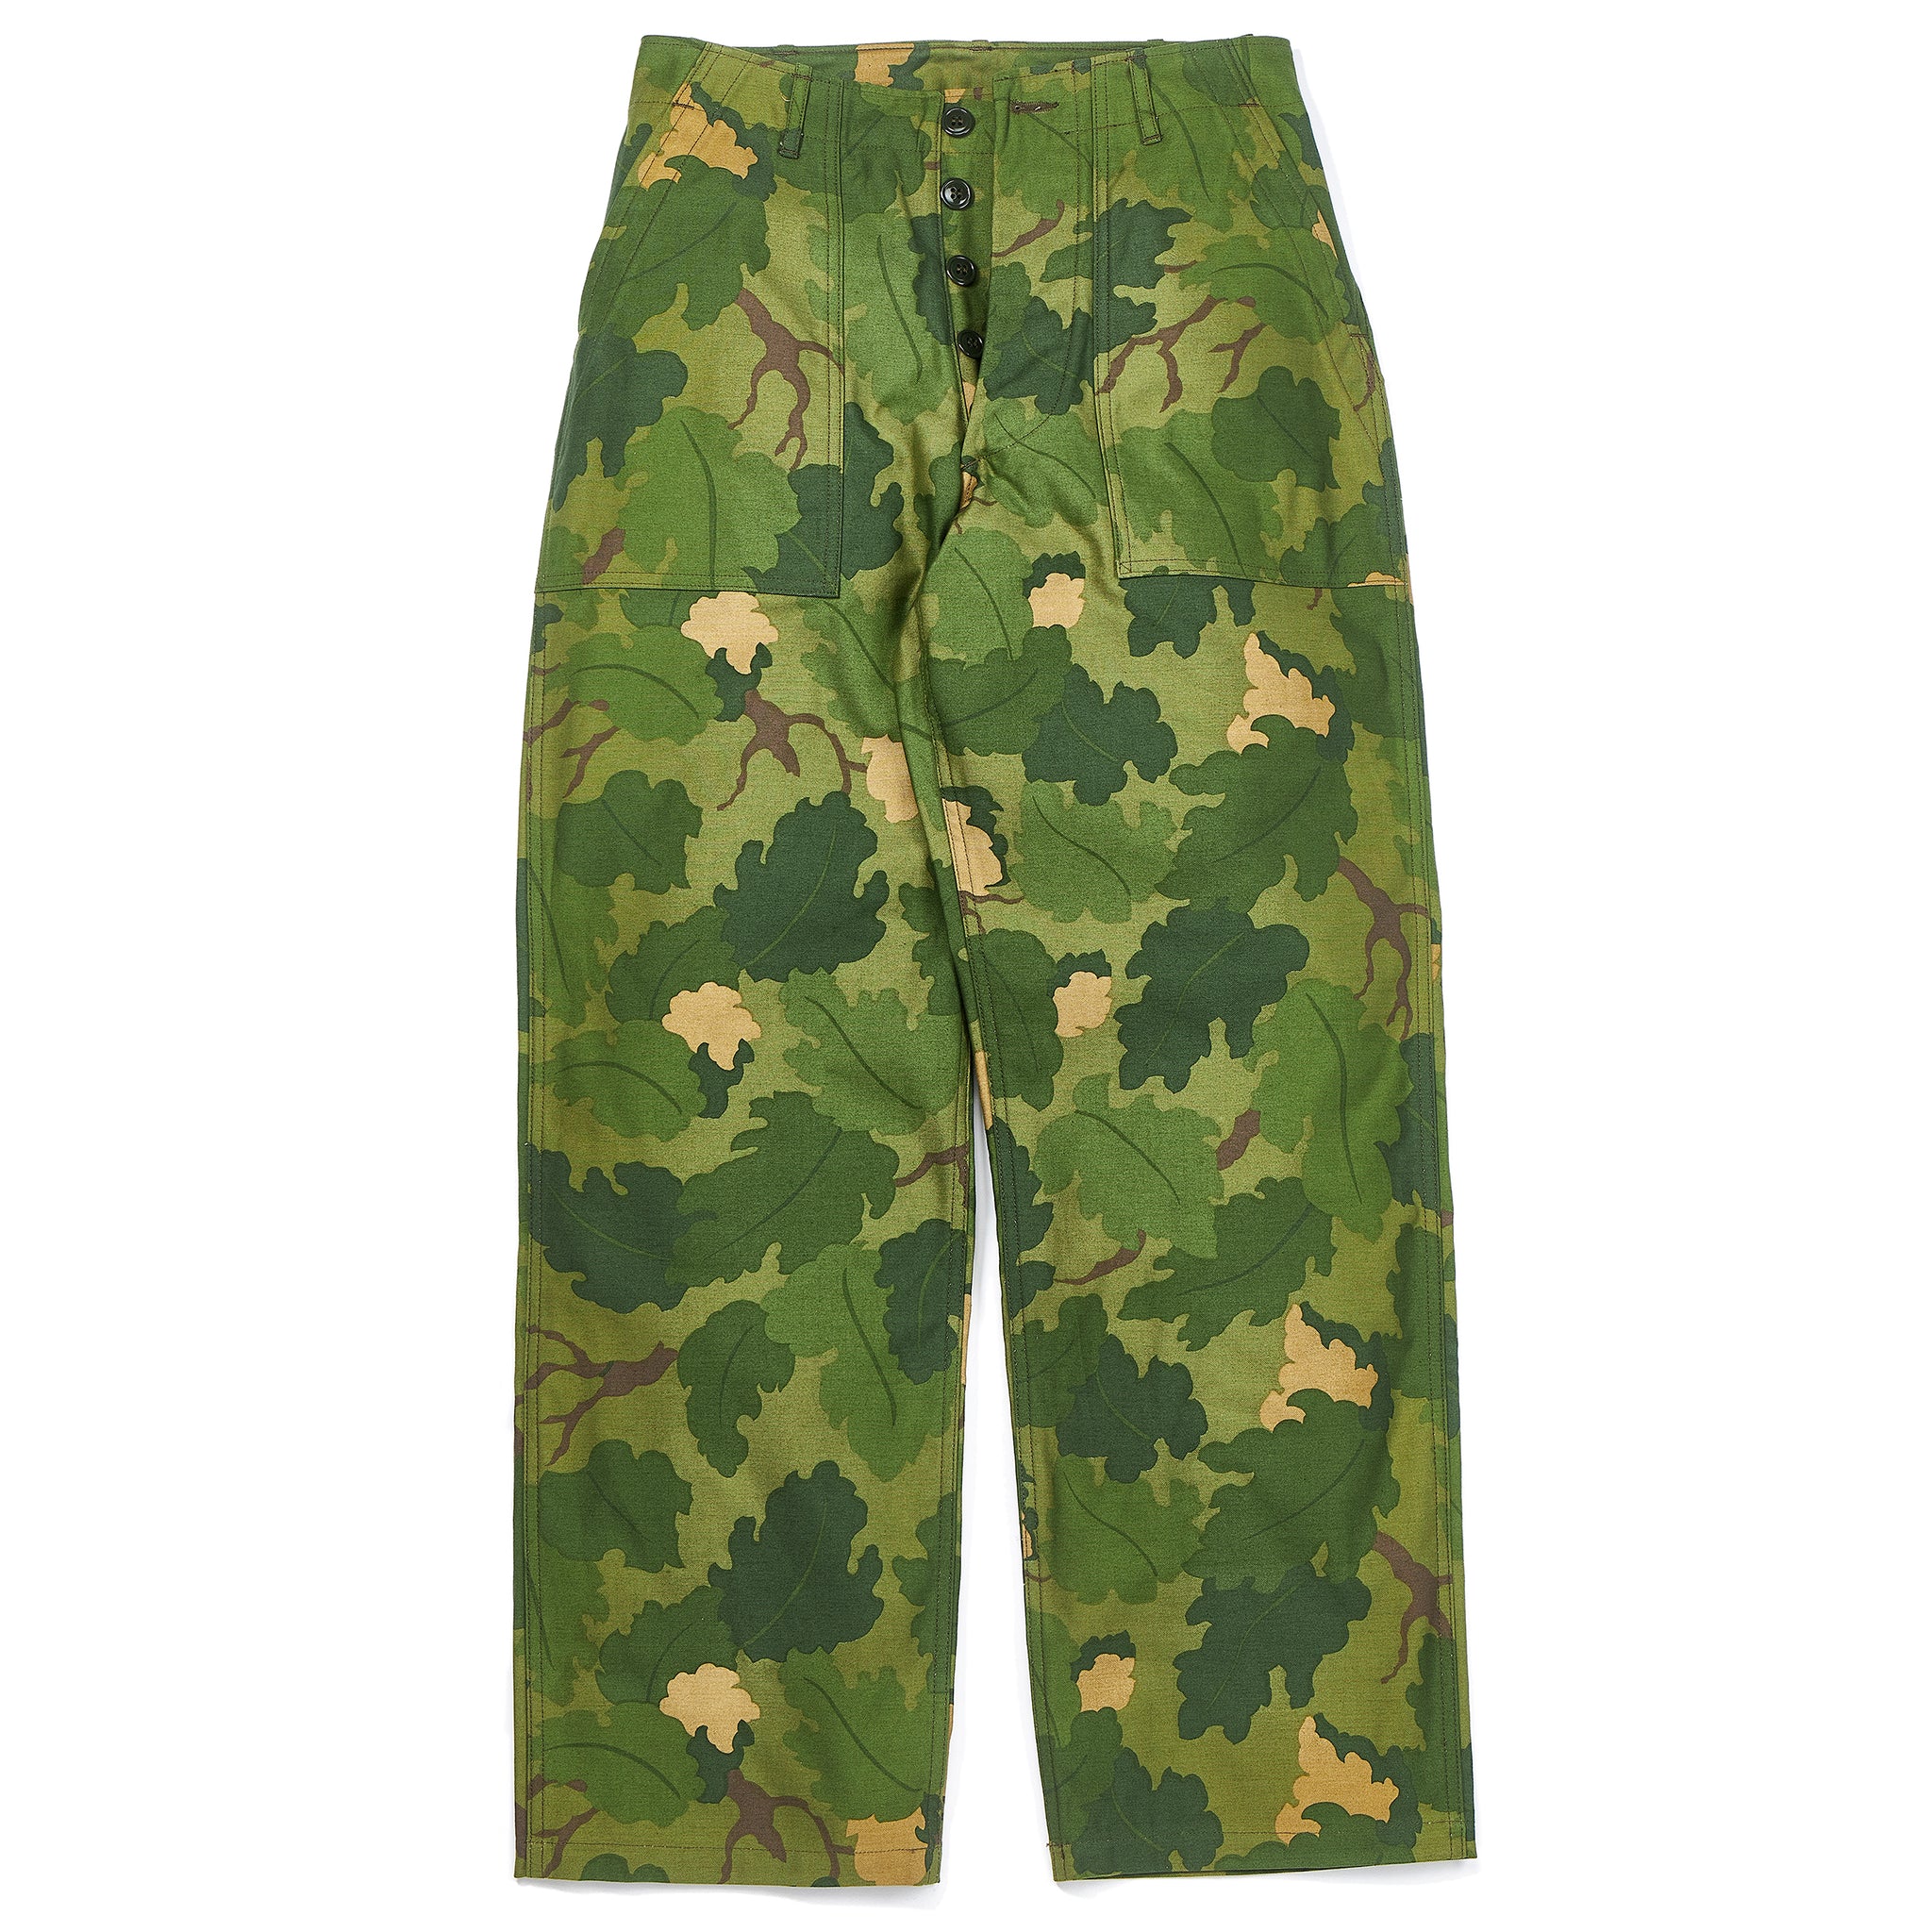 WWII US Army Camouflage Pants for Review - UNIFORMS - U.S. Militaria Forum